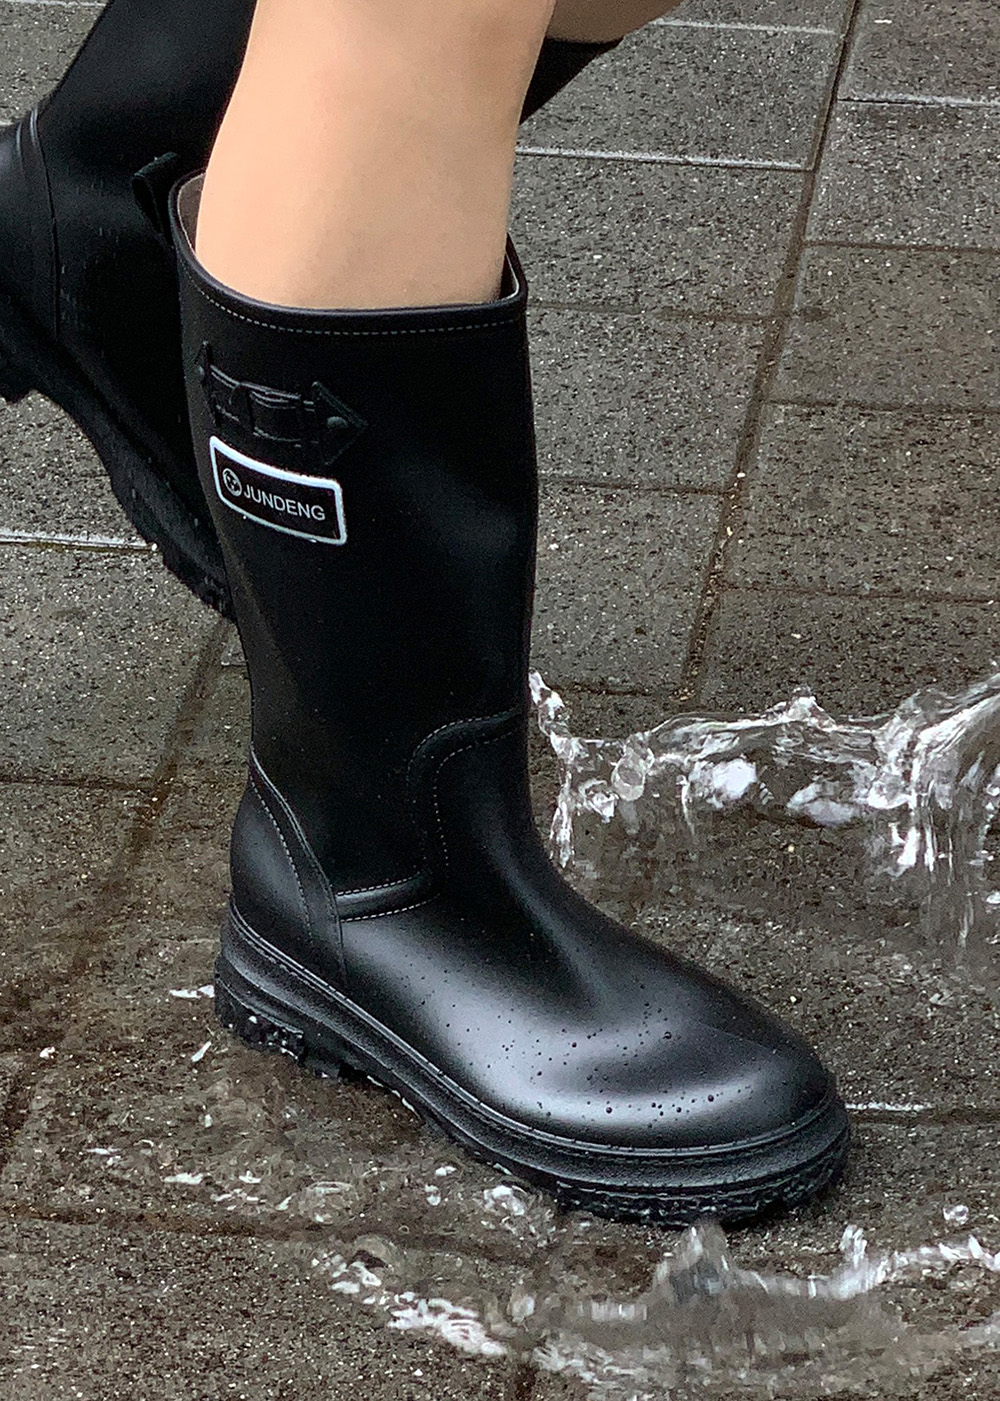 PATCHED RAIN BOOTS